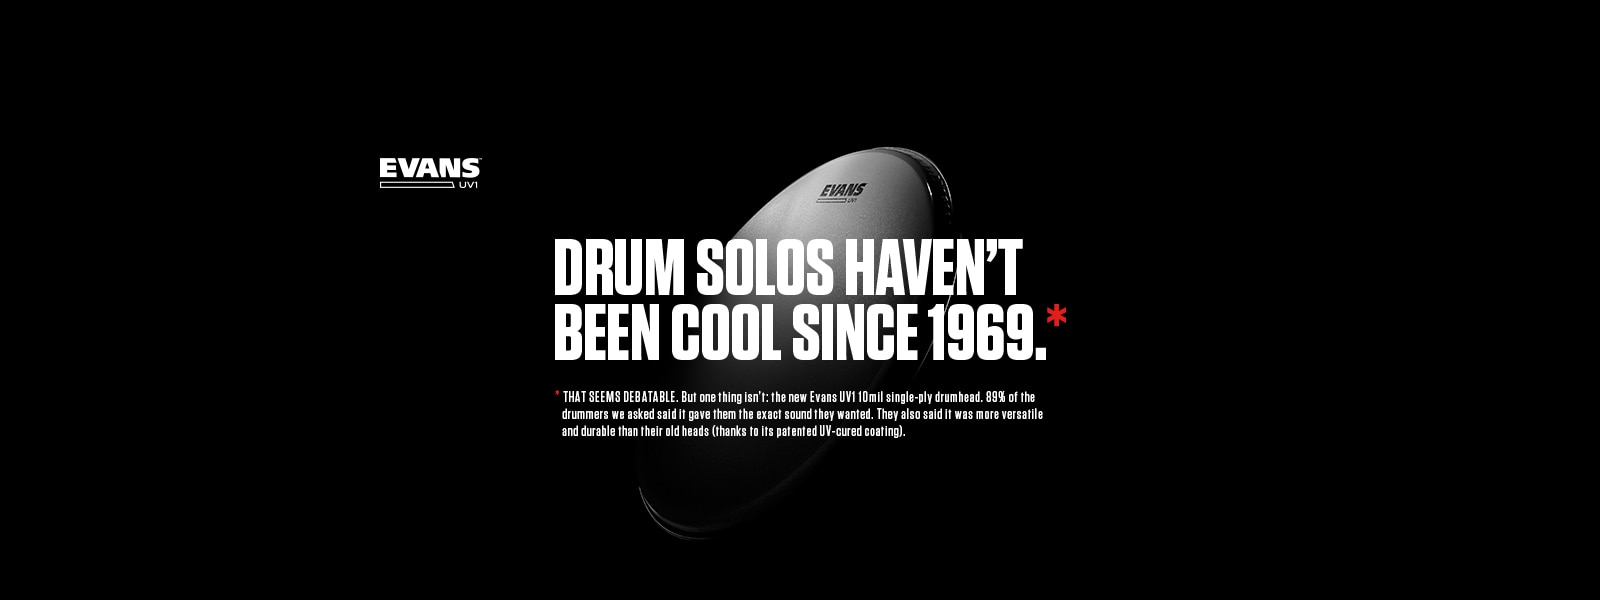 Drum solos have not been cool since 1989